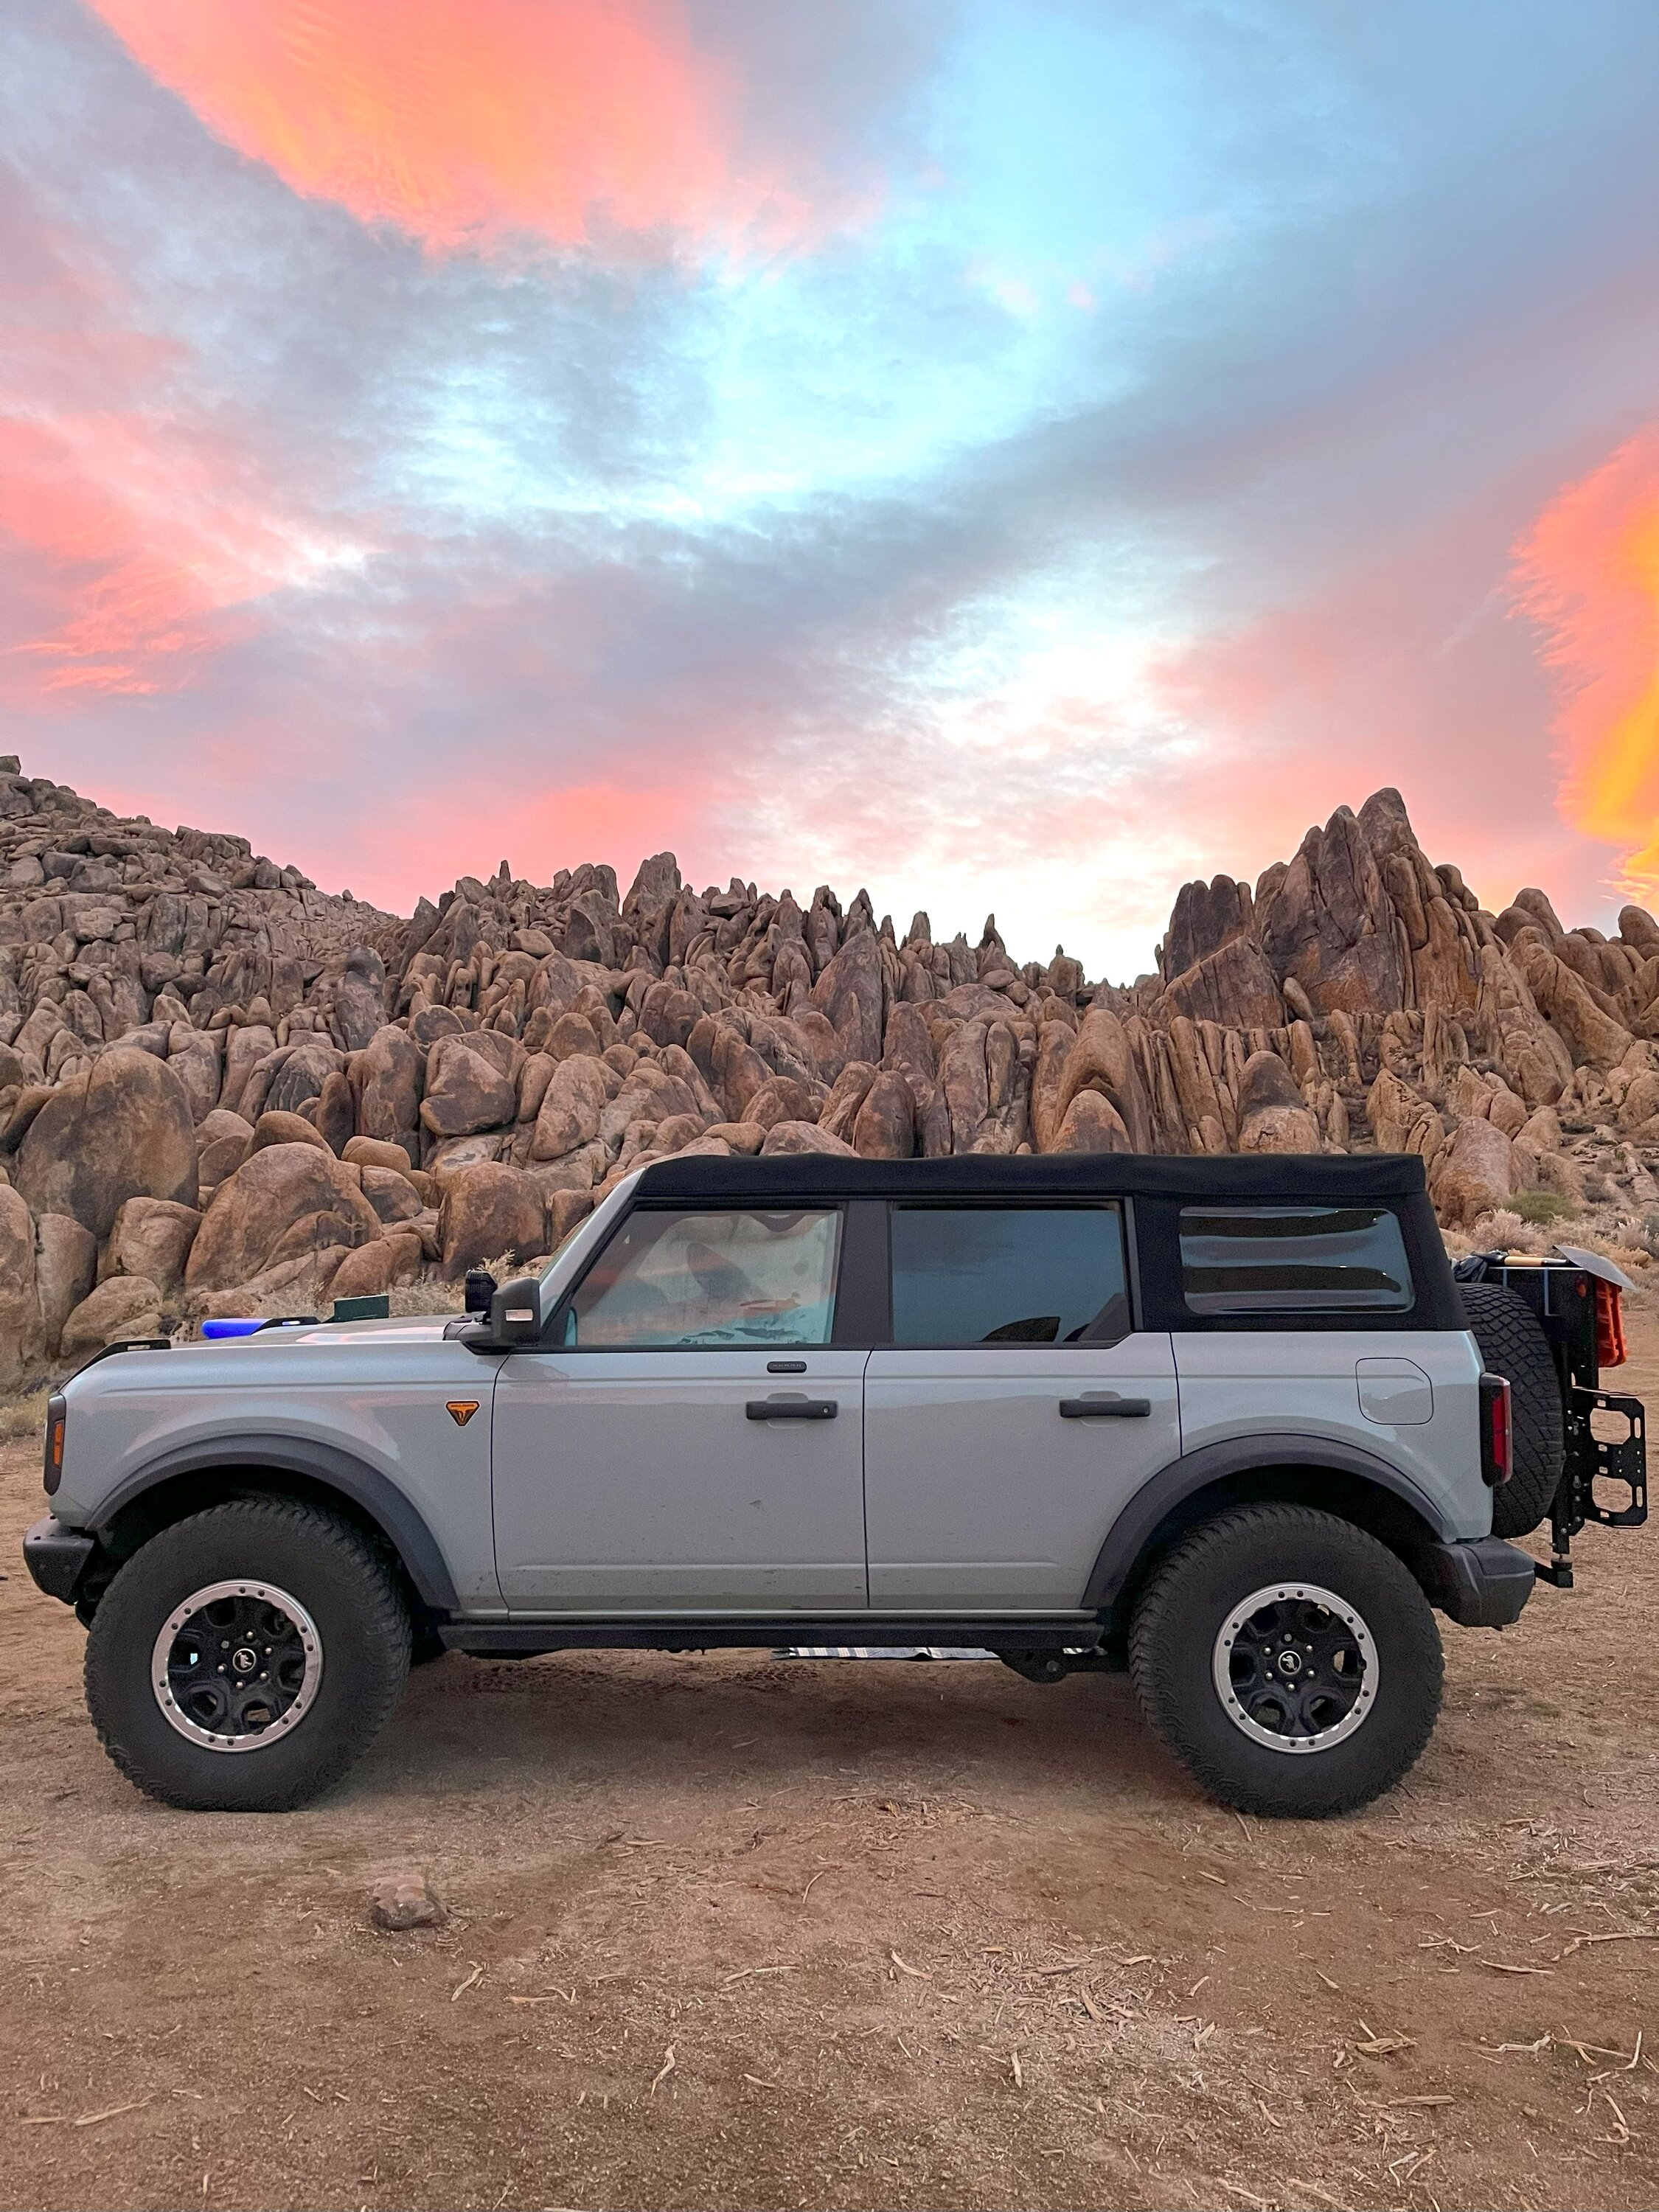 Ford Bronco Finding an EPIC campsite and sleeping in the back of the Bronco - Alabama Hills [pics and video] 1-sunrise